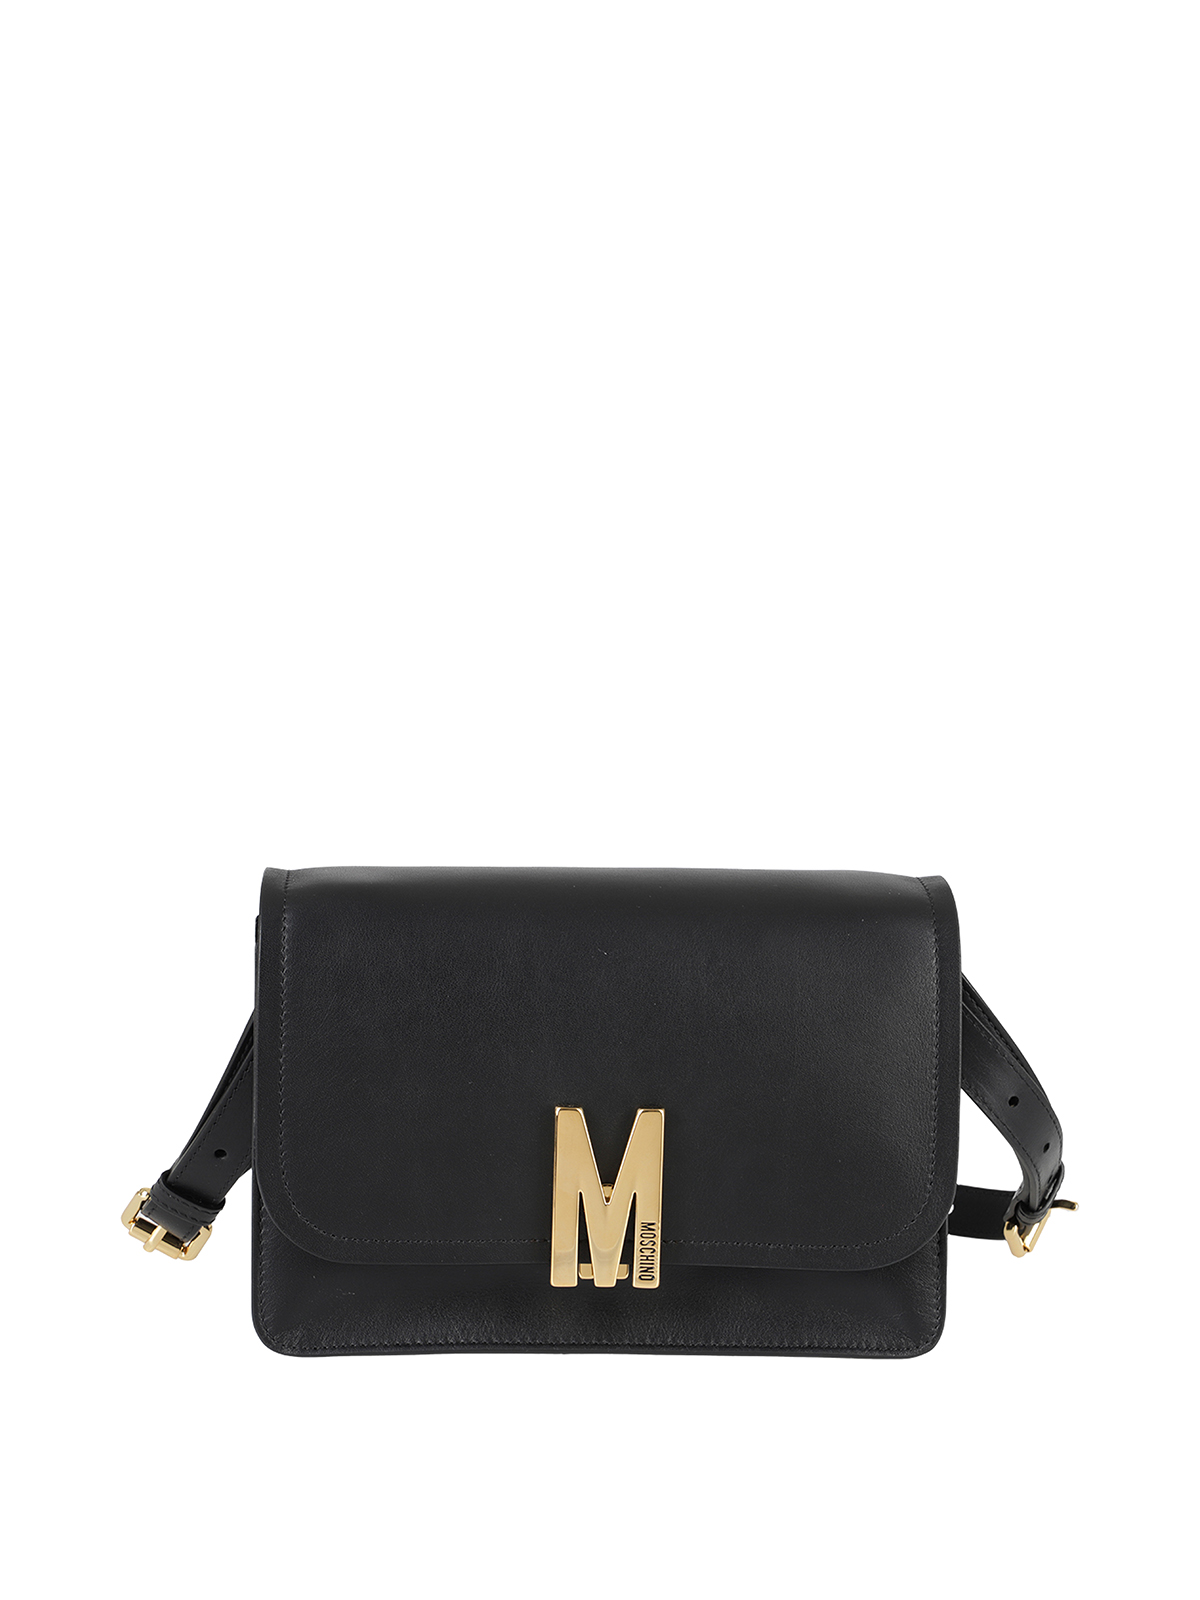 Moschino Leather Bag In Black